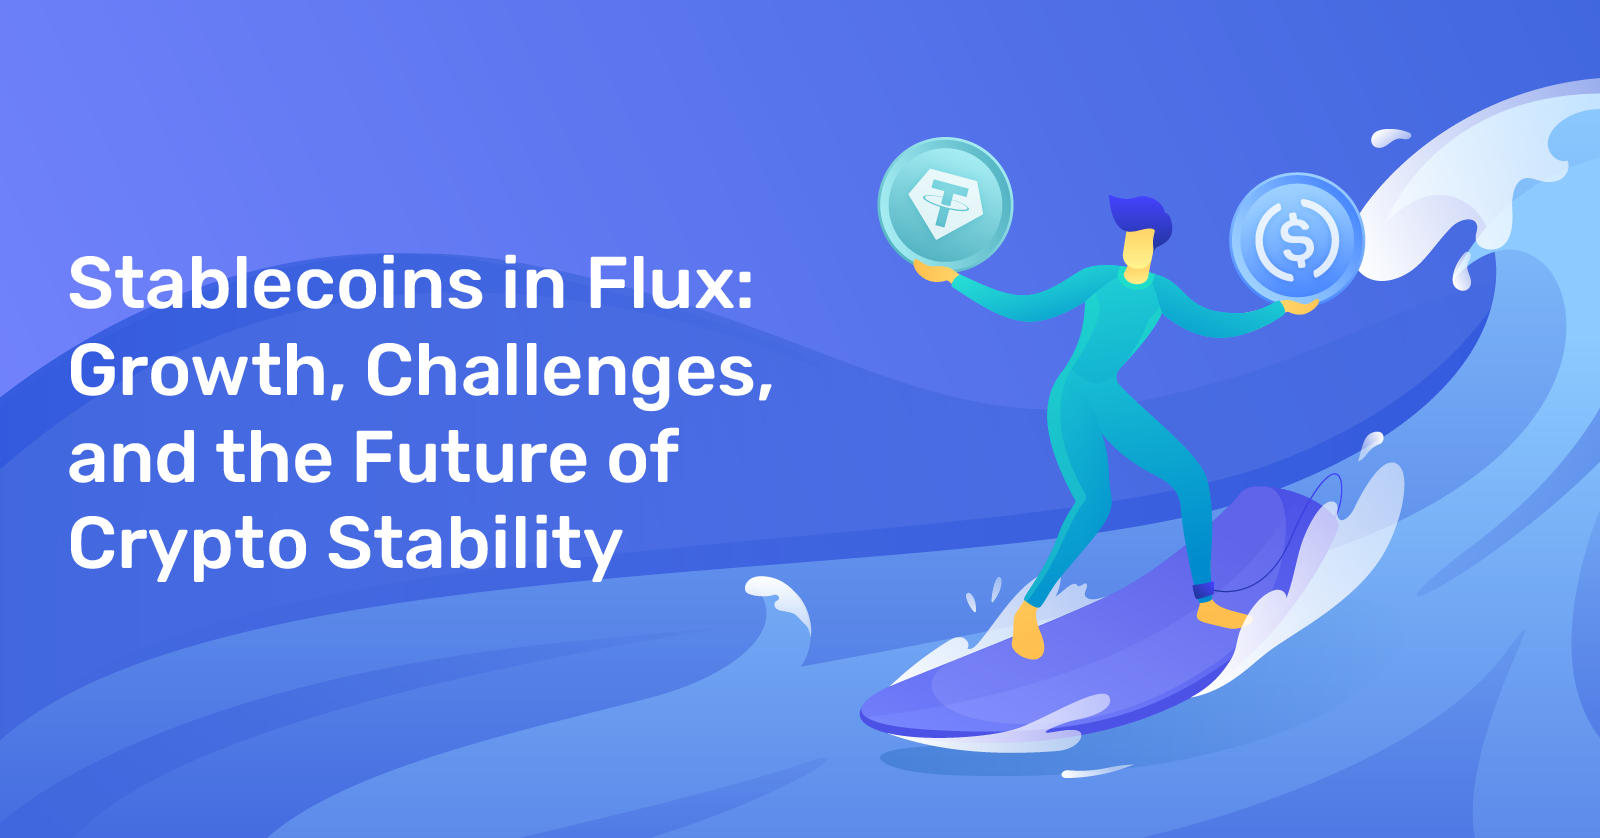 Stablecoins in Flux: Growth, Challenges, and the Future of Crypto Stability